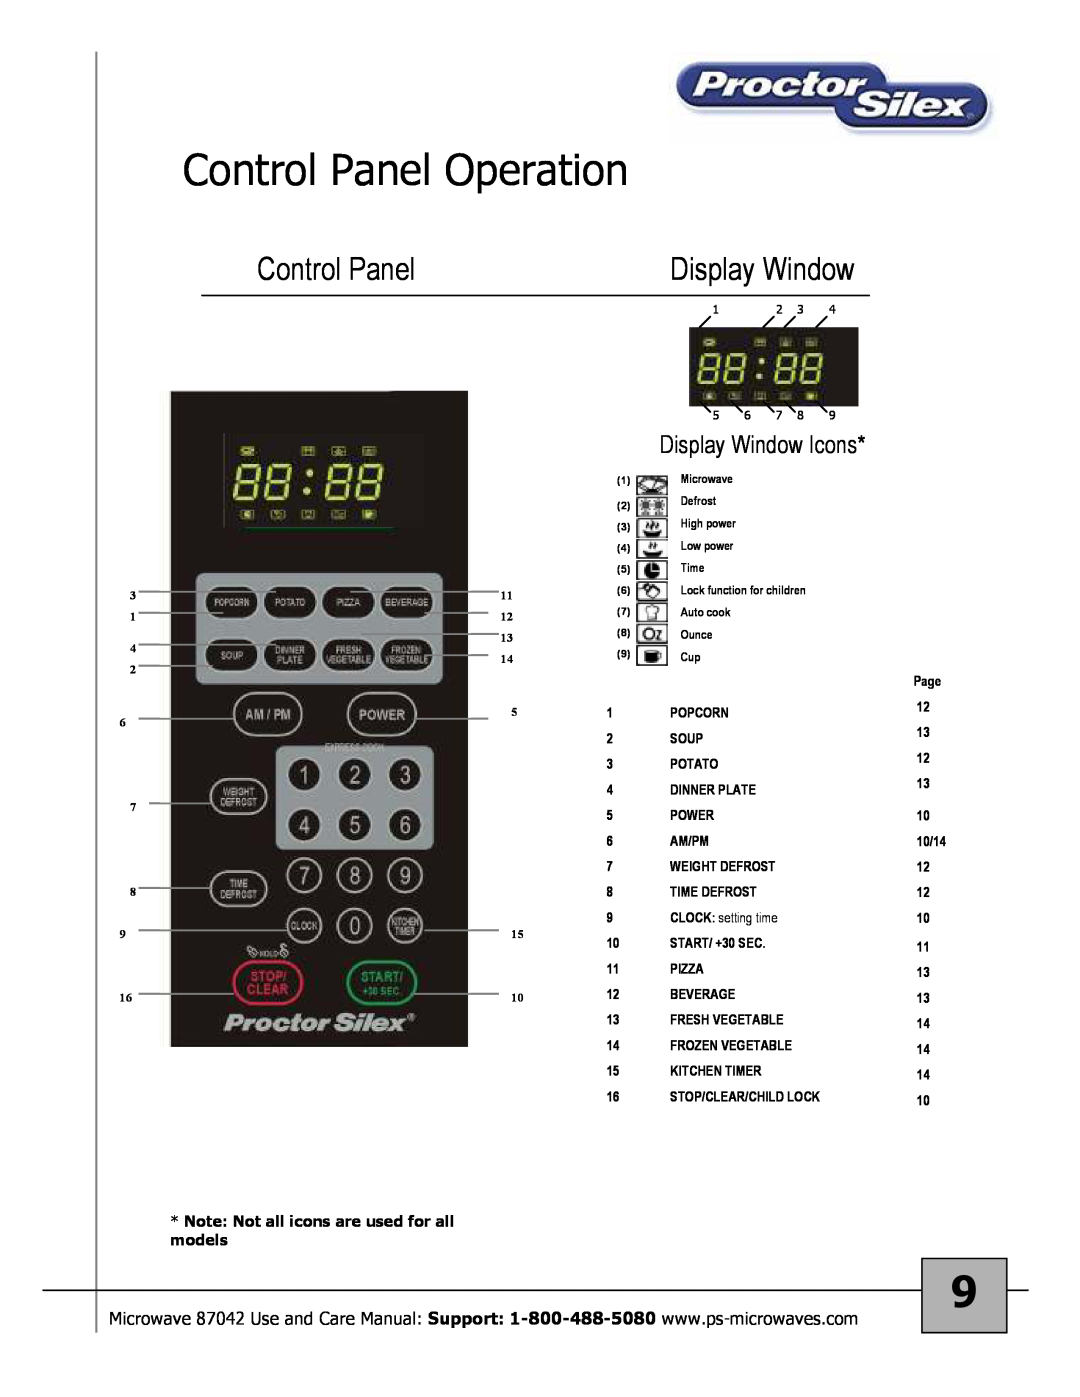 Proctor-Silex 87027 Control Panel Operation, Display Window Icons, Note Not all icons are used for all models 